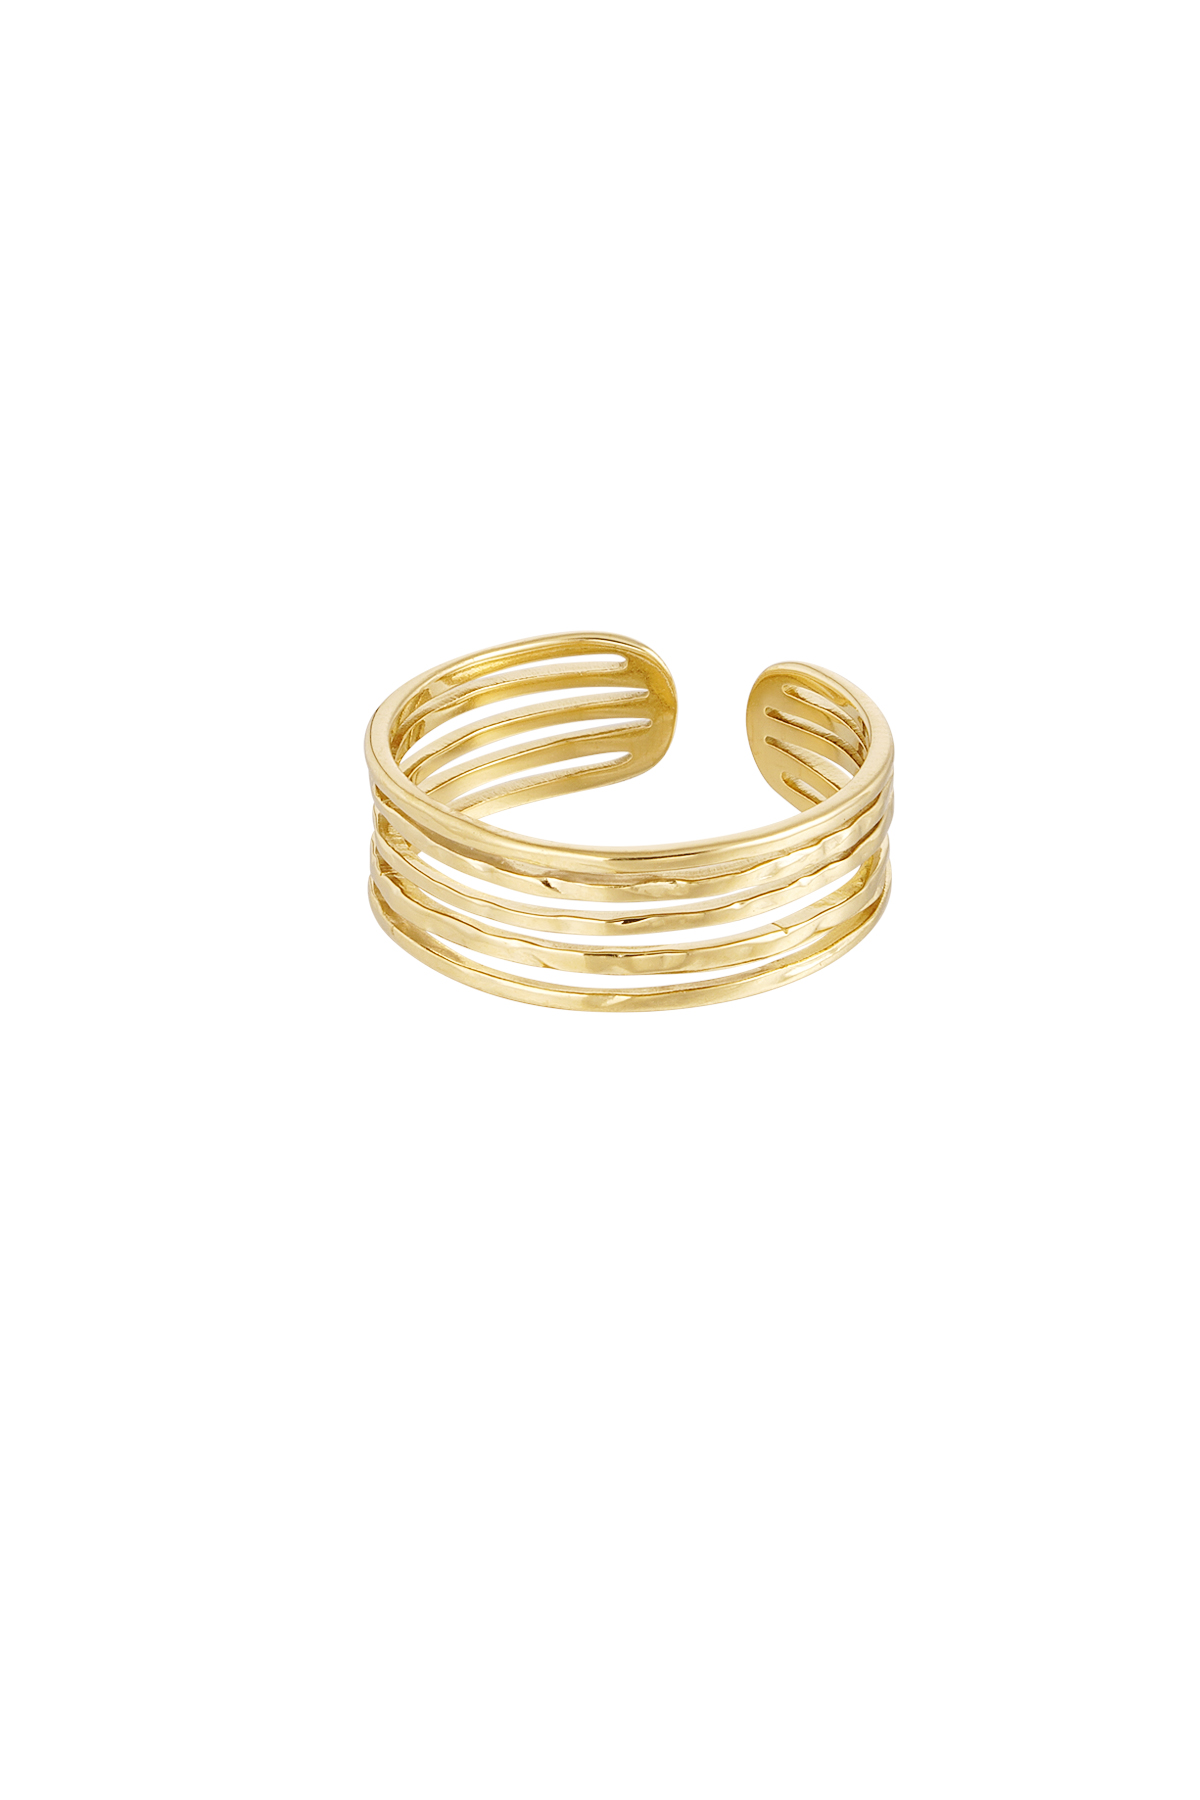 Ring 5 thin layers - gold 